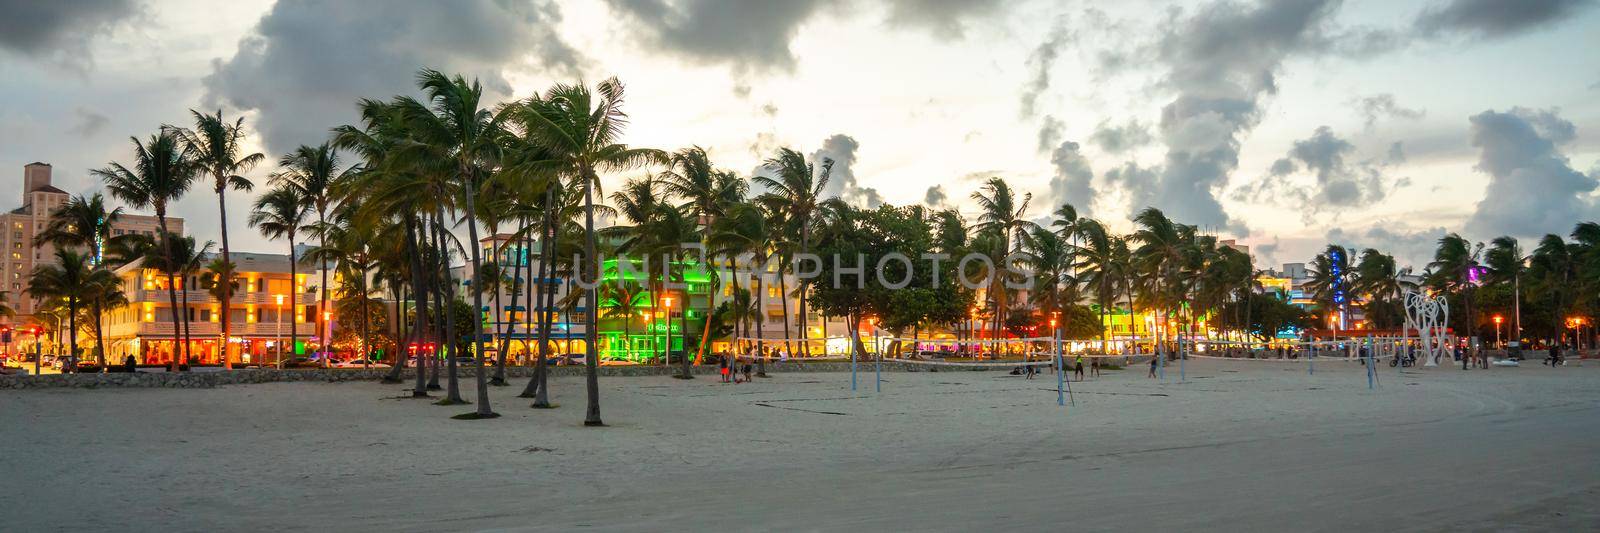 Miami Beach, USA - September 10, 2019: Ocean Drive hotels and restaurants at sunset. City skyline with palm trees at night. Art deco nightlife on South beach by Mariakray